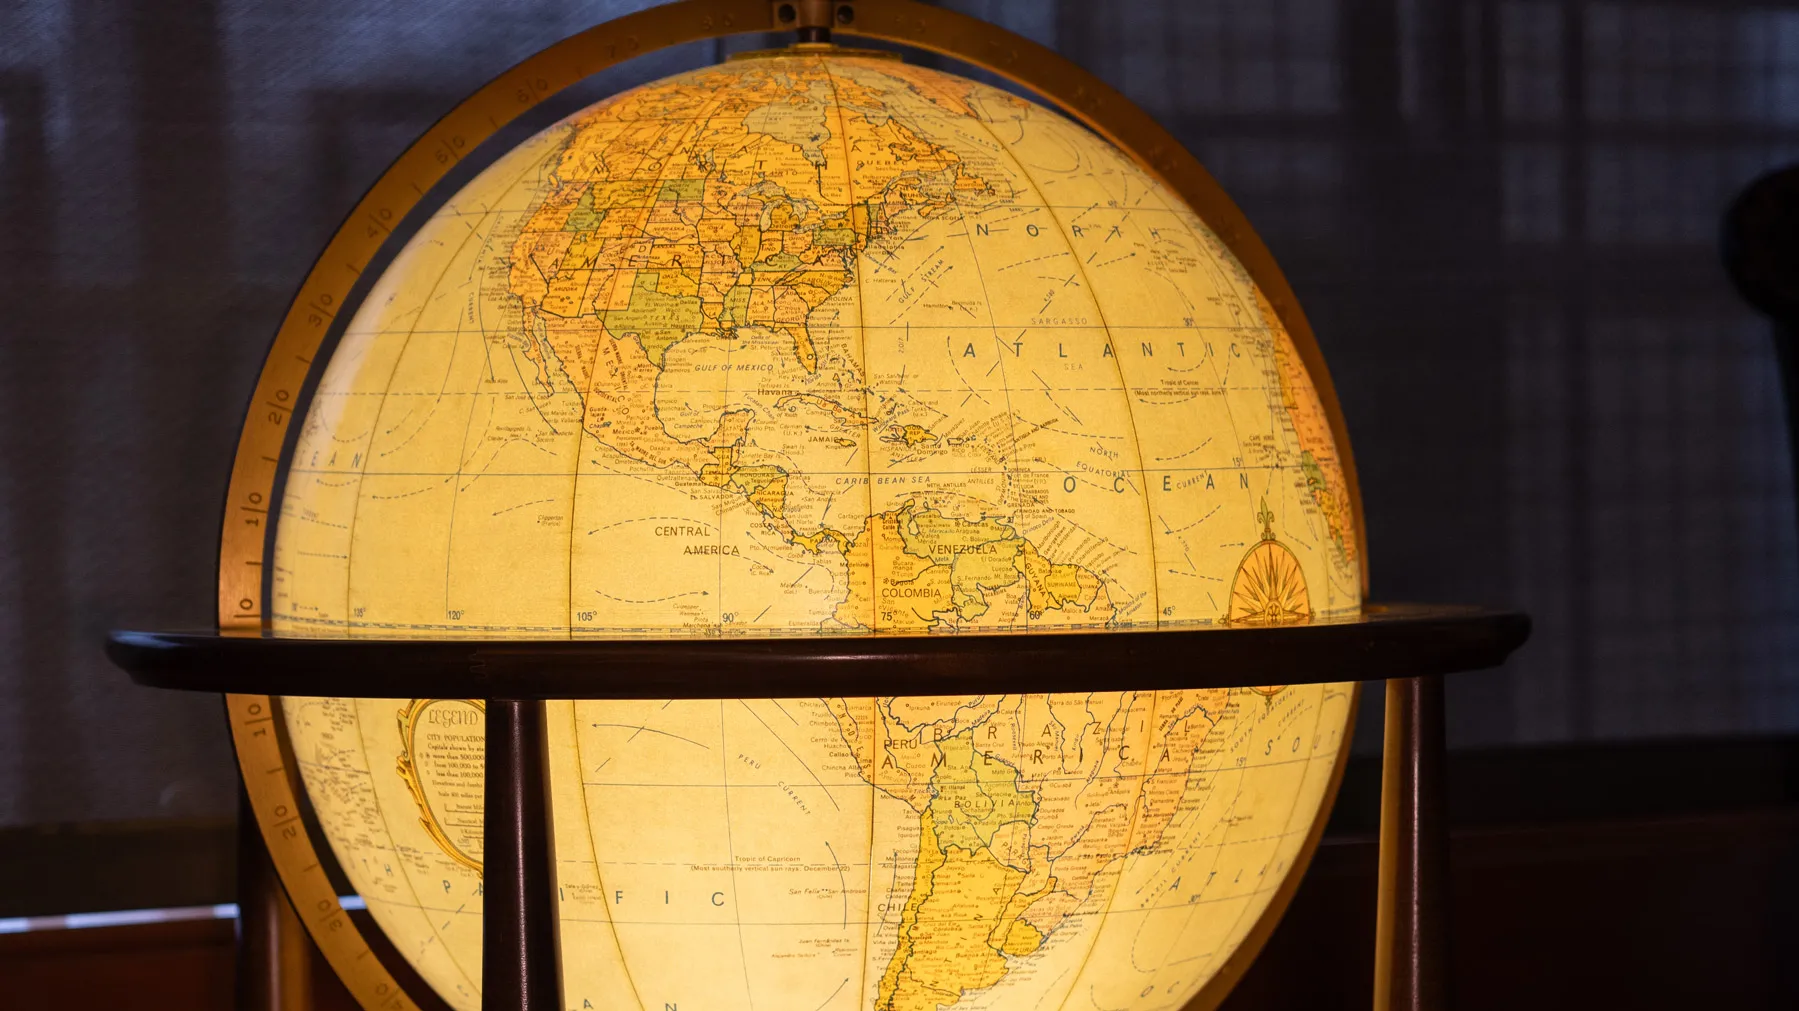 A lighted-up globe, positioned to show North and South America is held in a simple wooden stand. They background of the photo is dark, so the globe shines brightly.